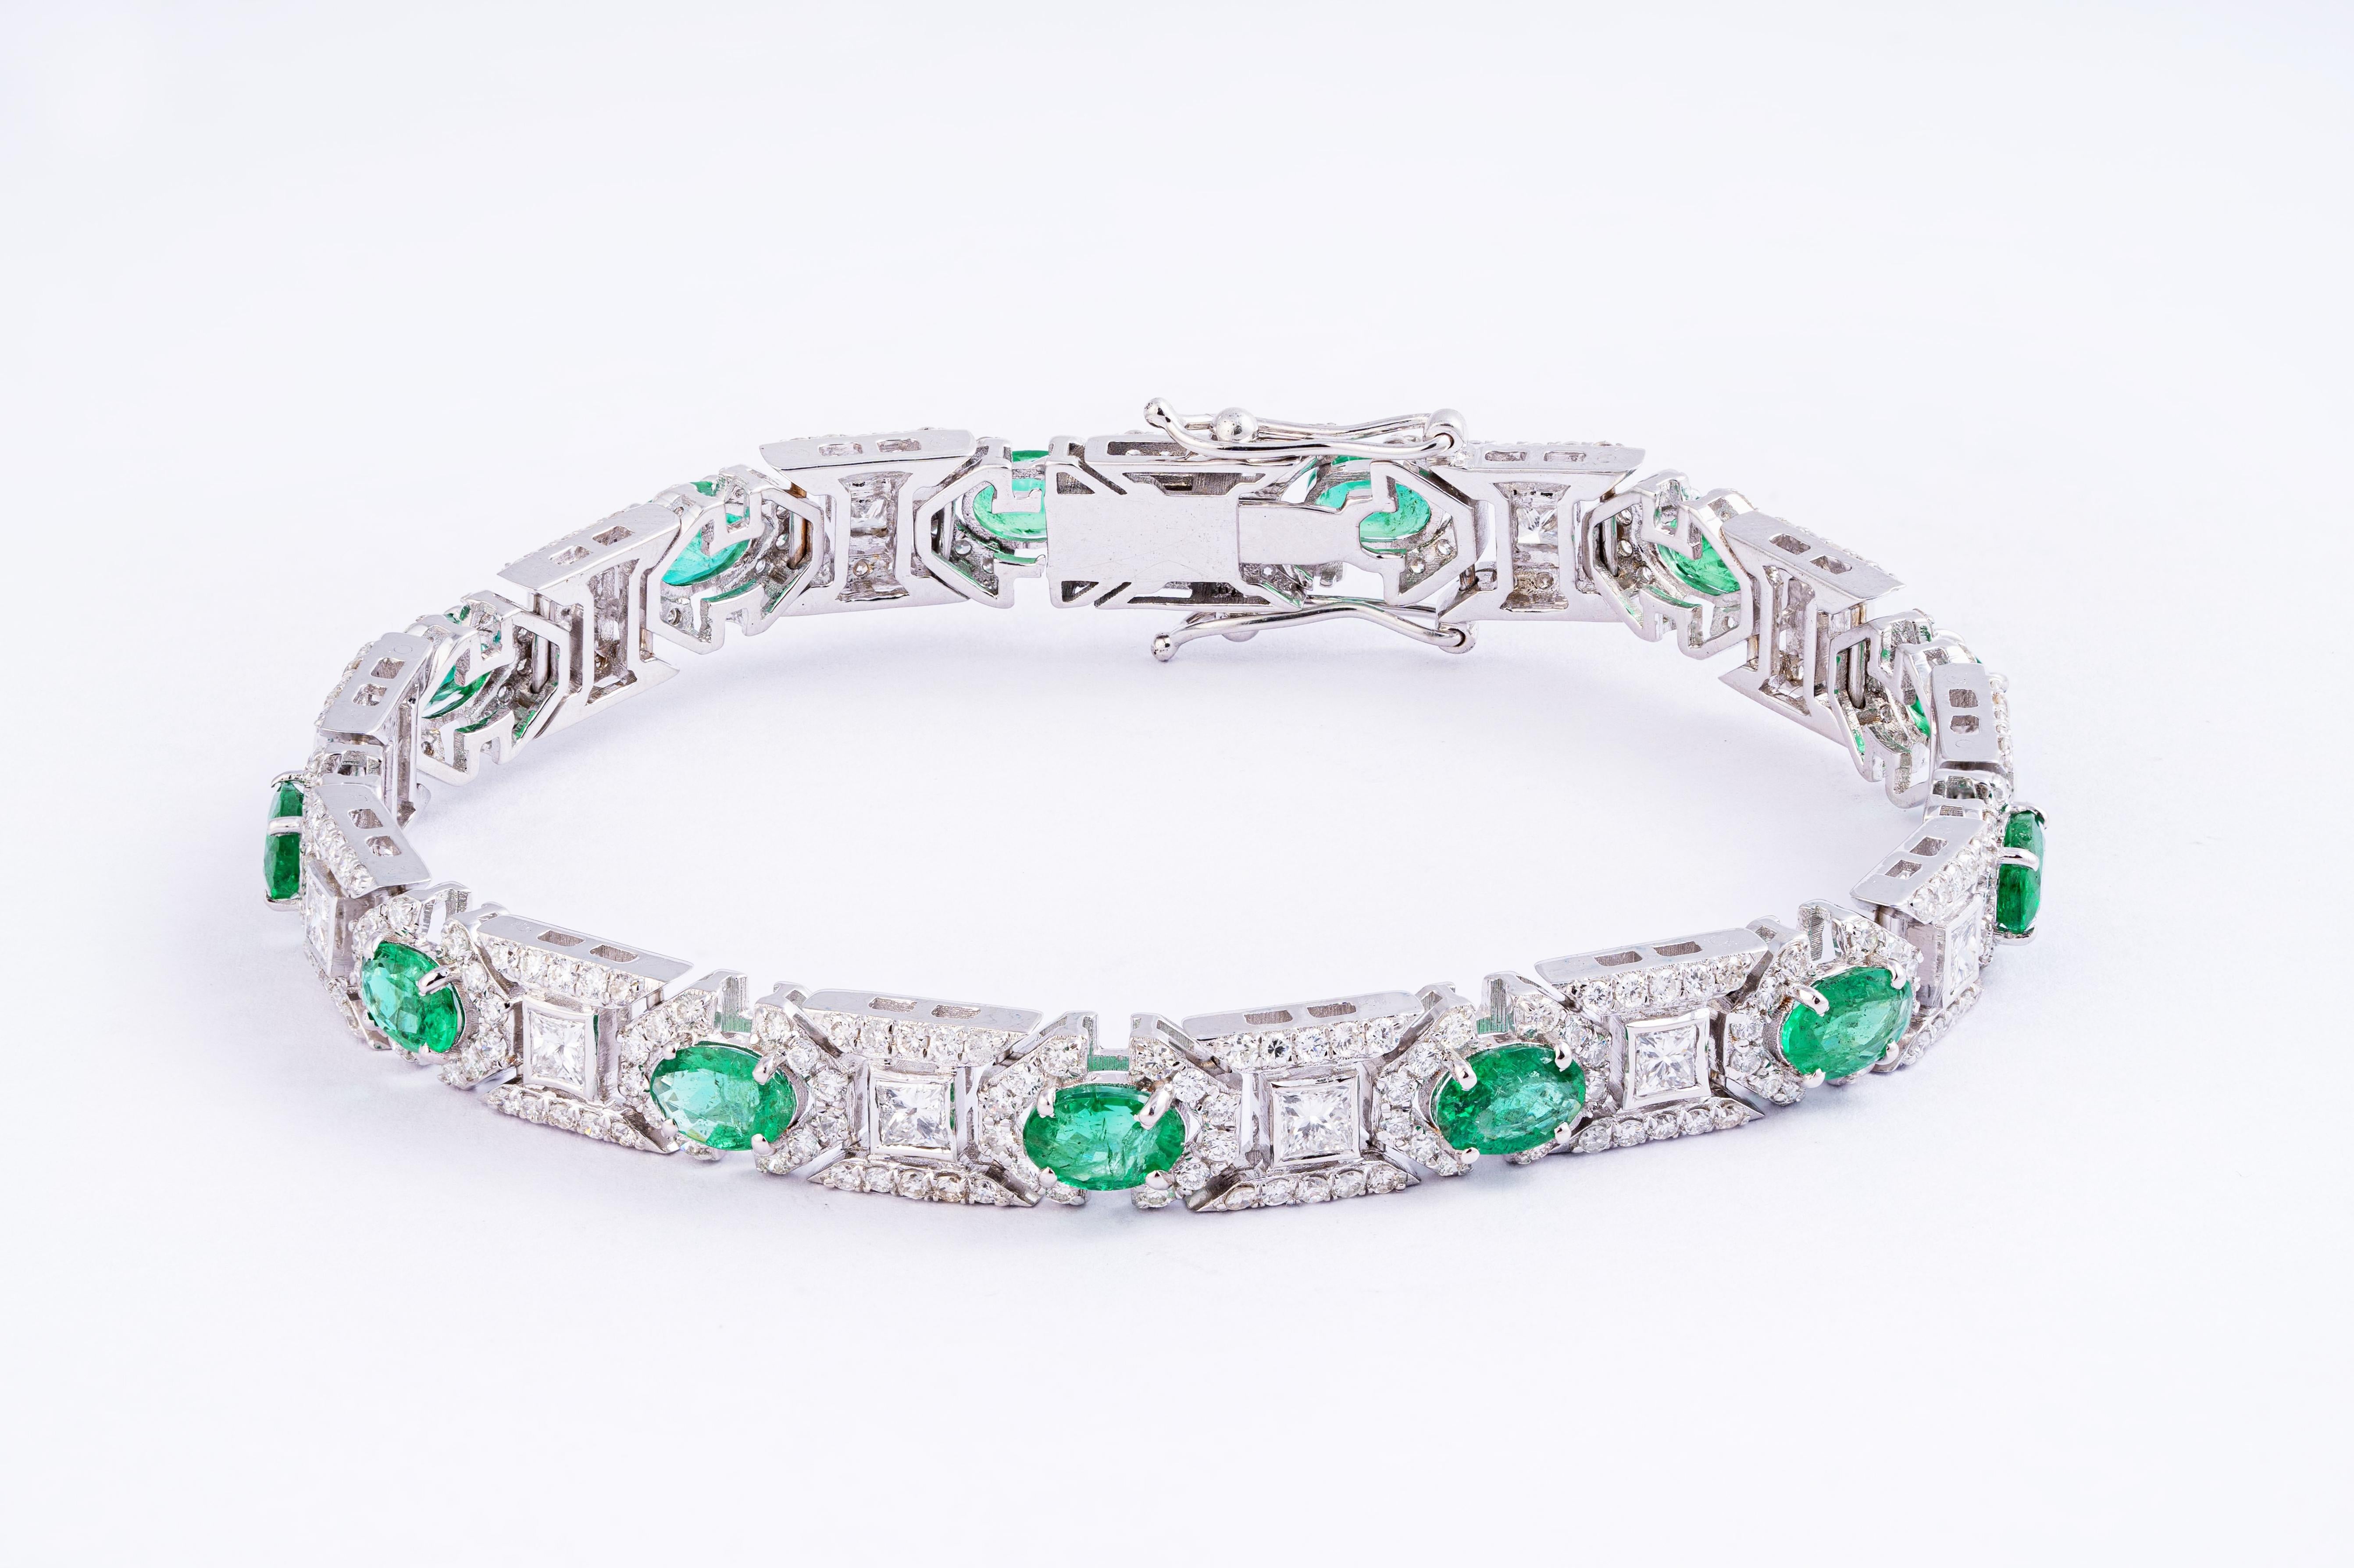 This is a wonderful natural Zambian Emerald tennis bracelet. it has very high quality emeralds and very good quality diamonds ( vsi ) clarity and G Colour .

Emerald: 5.85 cts
diamonds : 4.06 cts
gold : 20.17 gms



Its very hard to capture the true